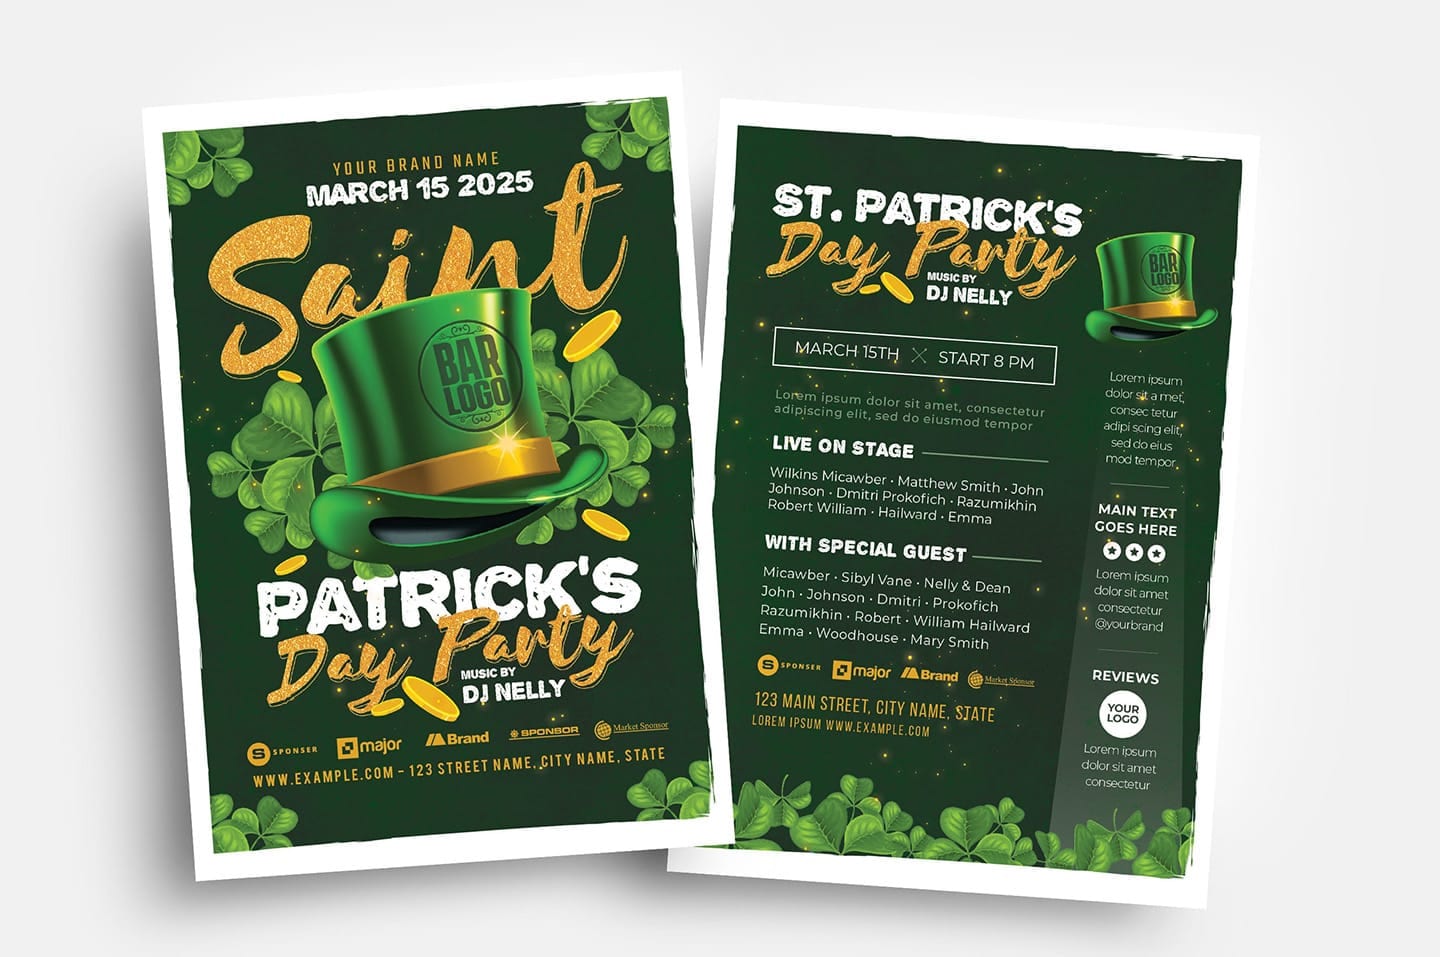 St. Patrick's Day Party Flyer Template (PSD, Ai & Vector)